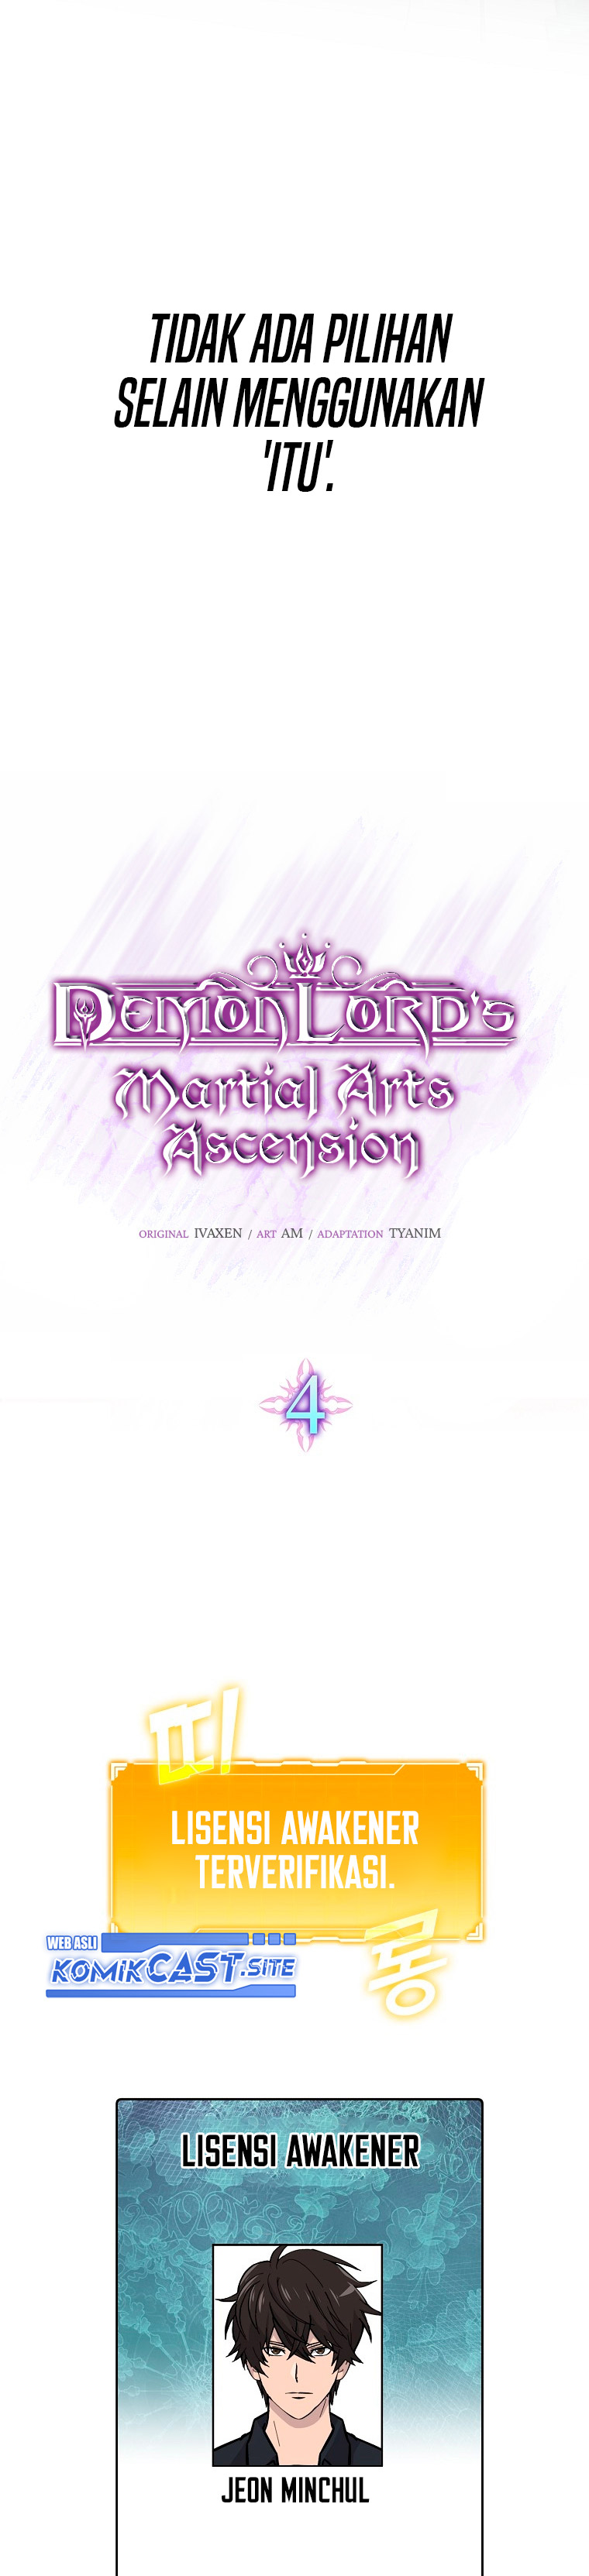 Demon Lord’s Martial Arts Ascension Chapter 04 Image 3